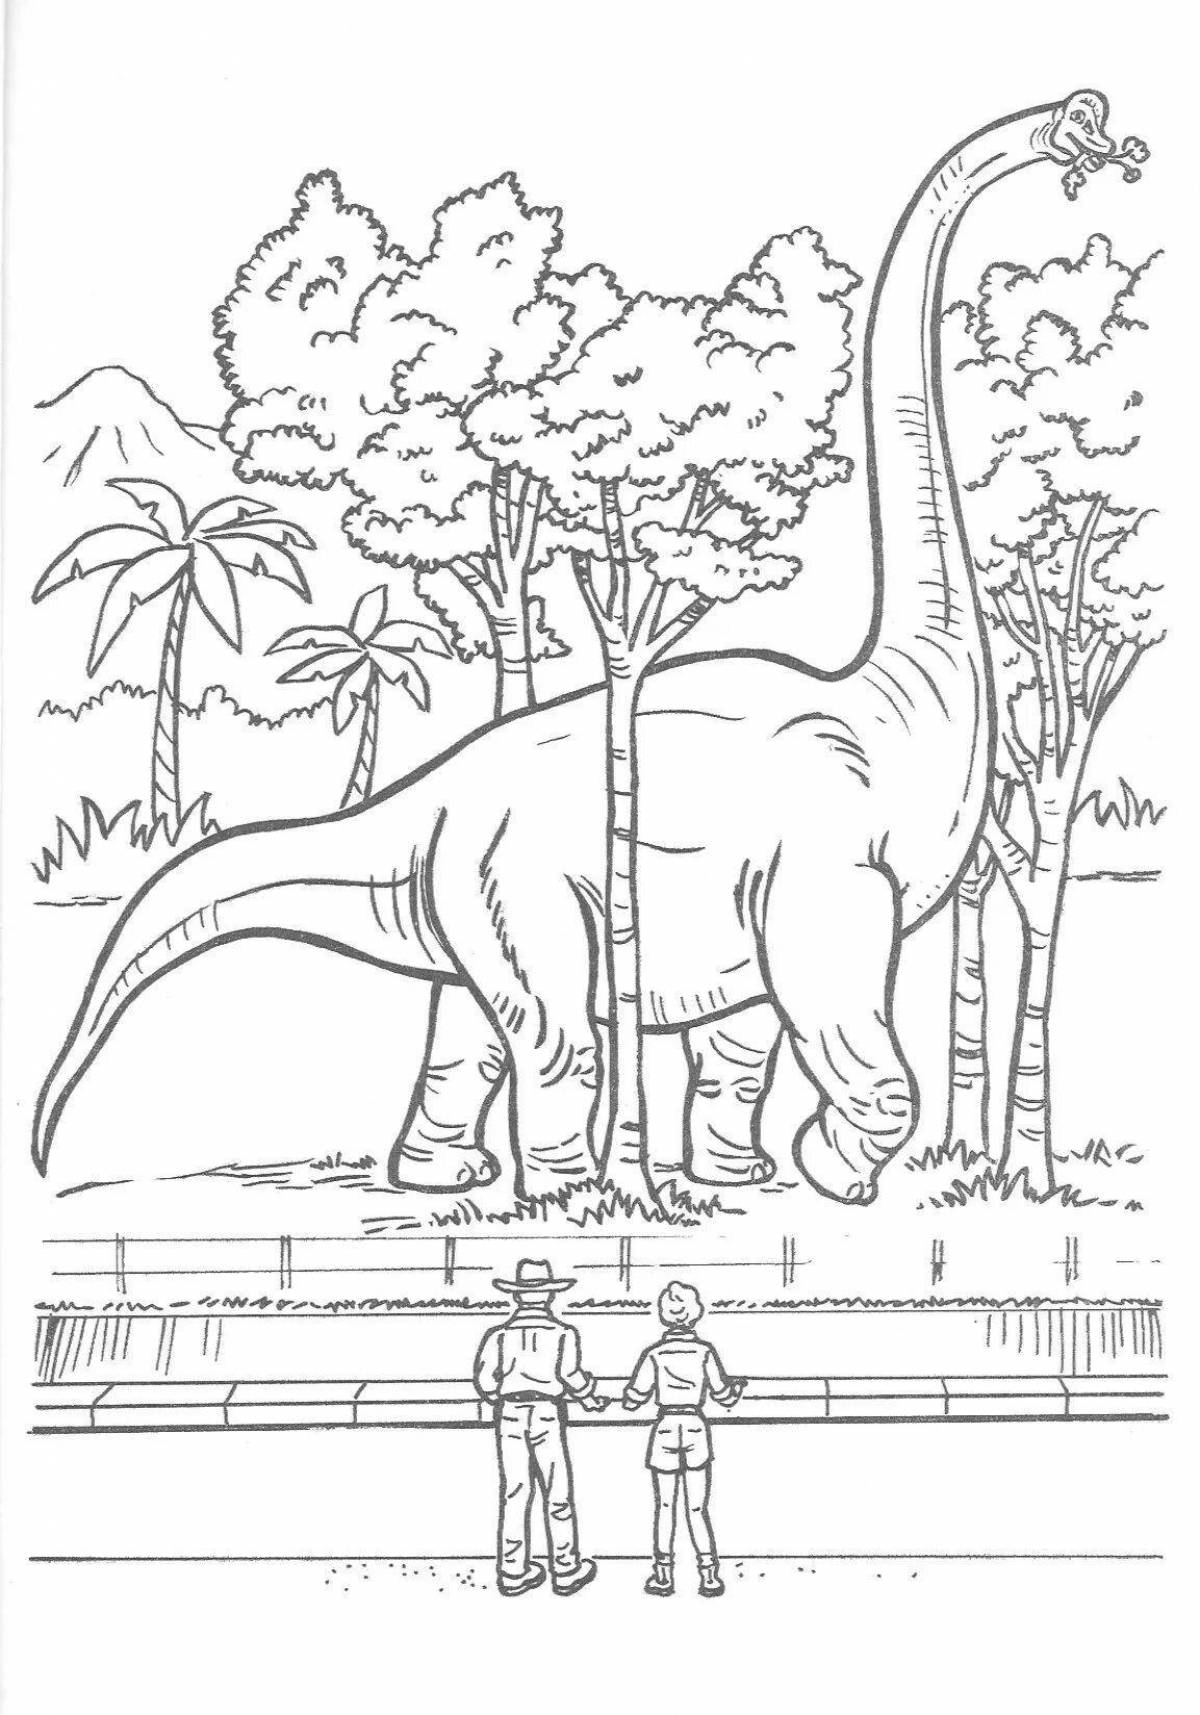 Outstanding jurassic park coloring book for kids